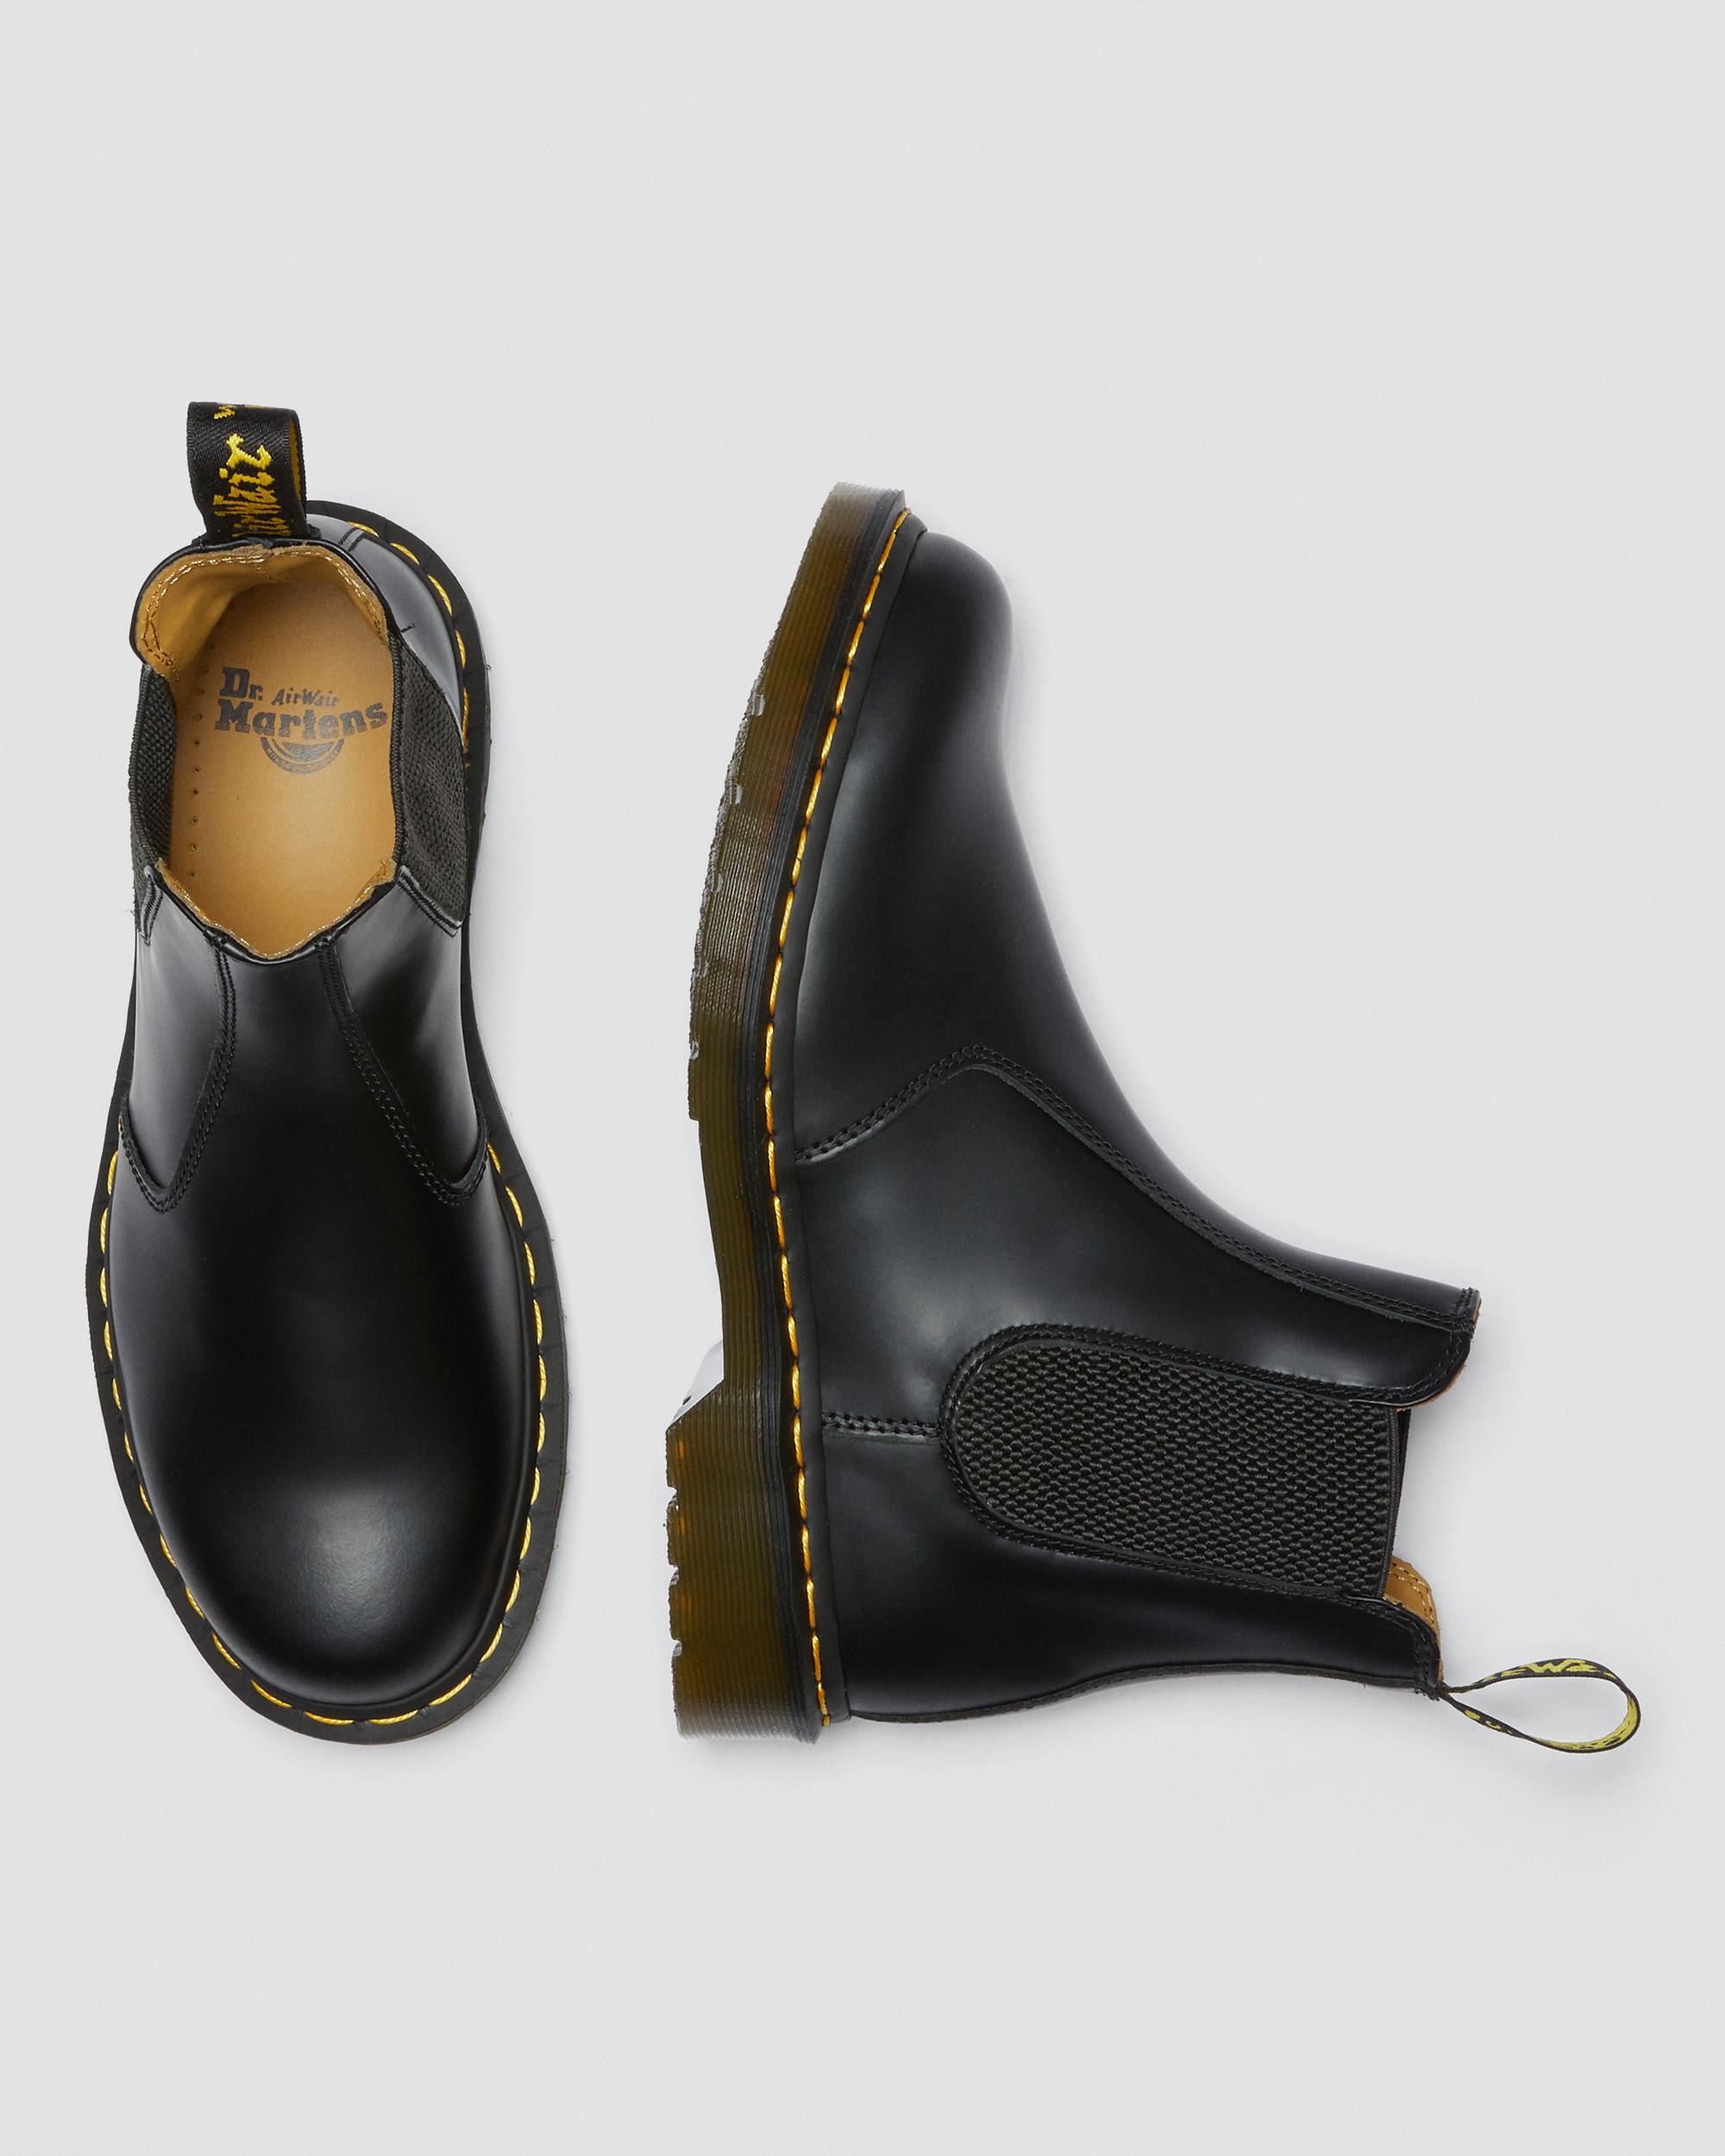 Ruwe olie deed het Vorige 2976 Yellow Stitch Smooth Leather Chelsea Boots | Dr. Martens